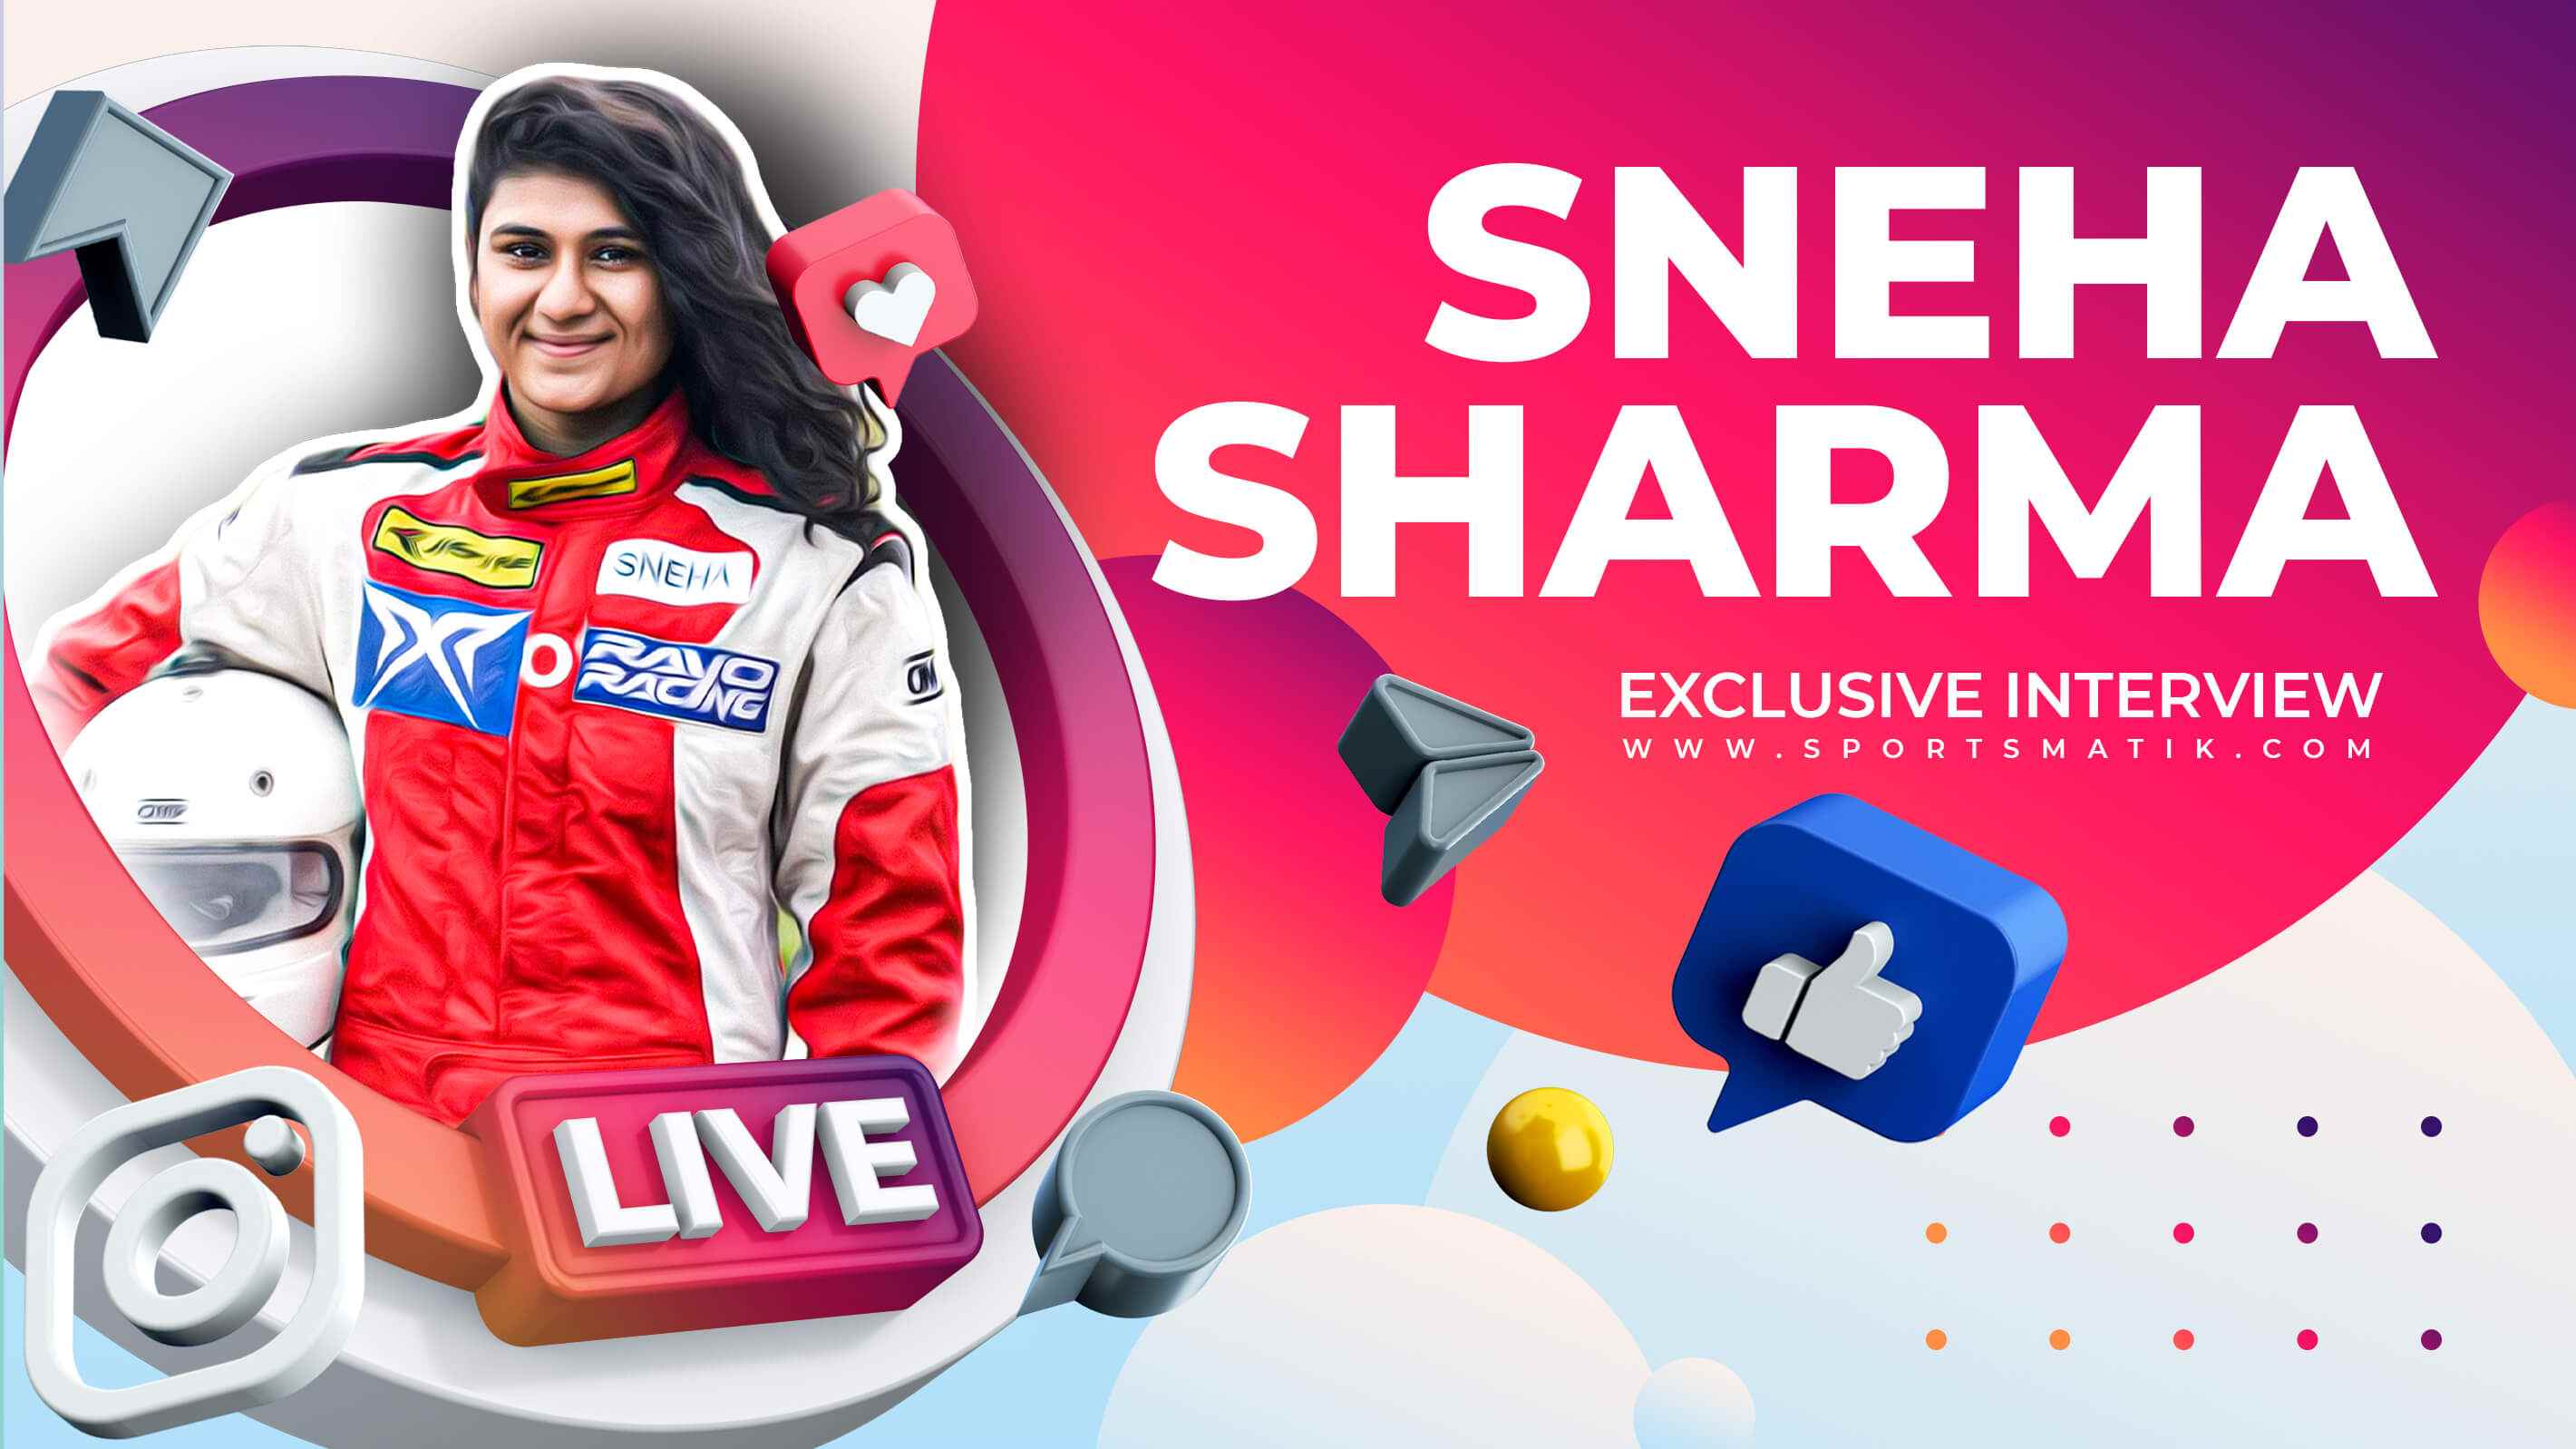 Women's Day Special: An Exclusive Interview with India's Racing Queen – Sneha Sharma